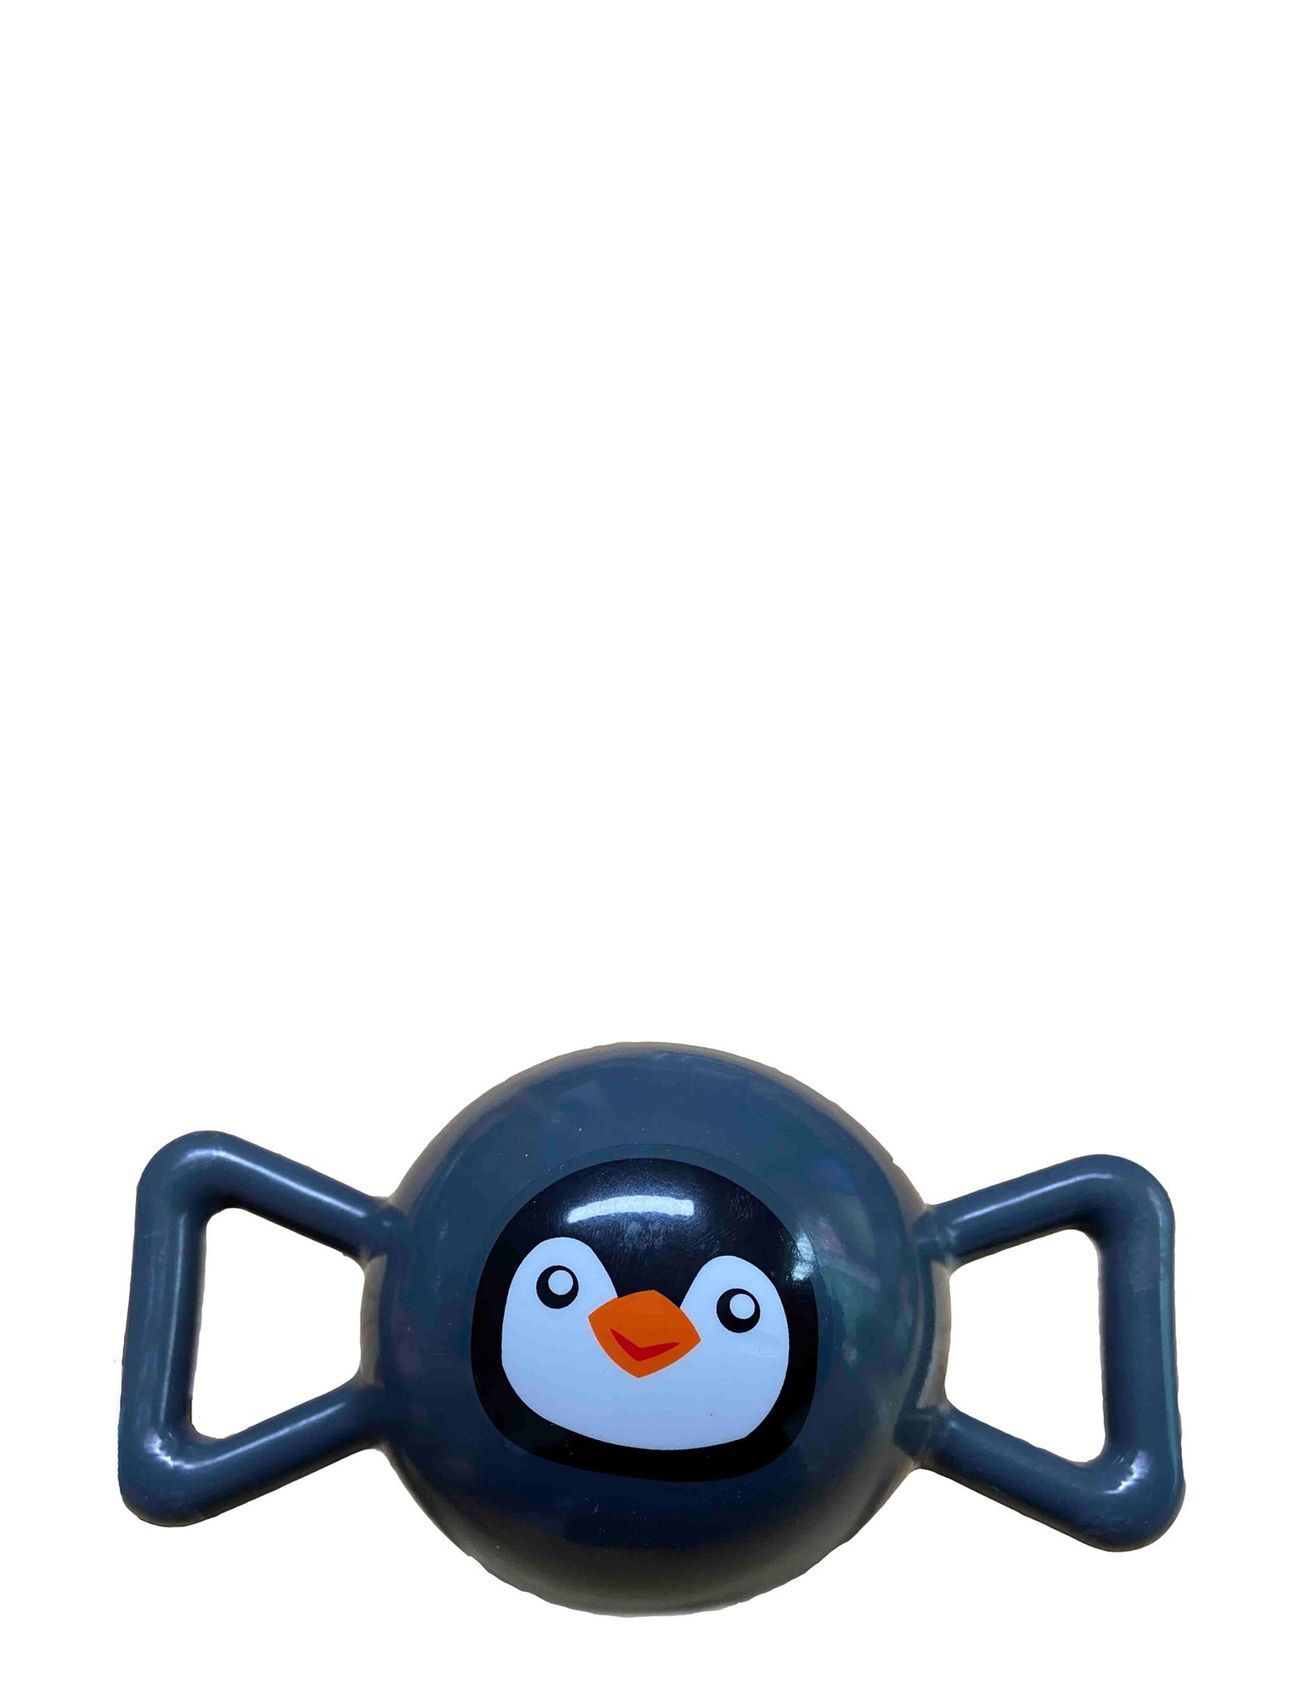 Magni Toys Ball "Penguin" With Rattle Toys Baby Toys Rattles Grå Magni Toys